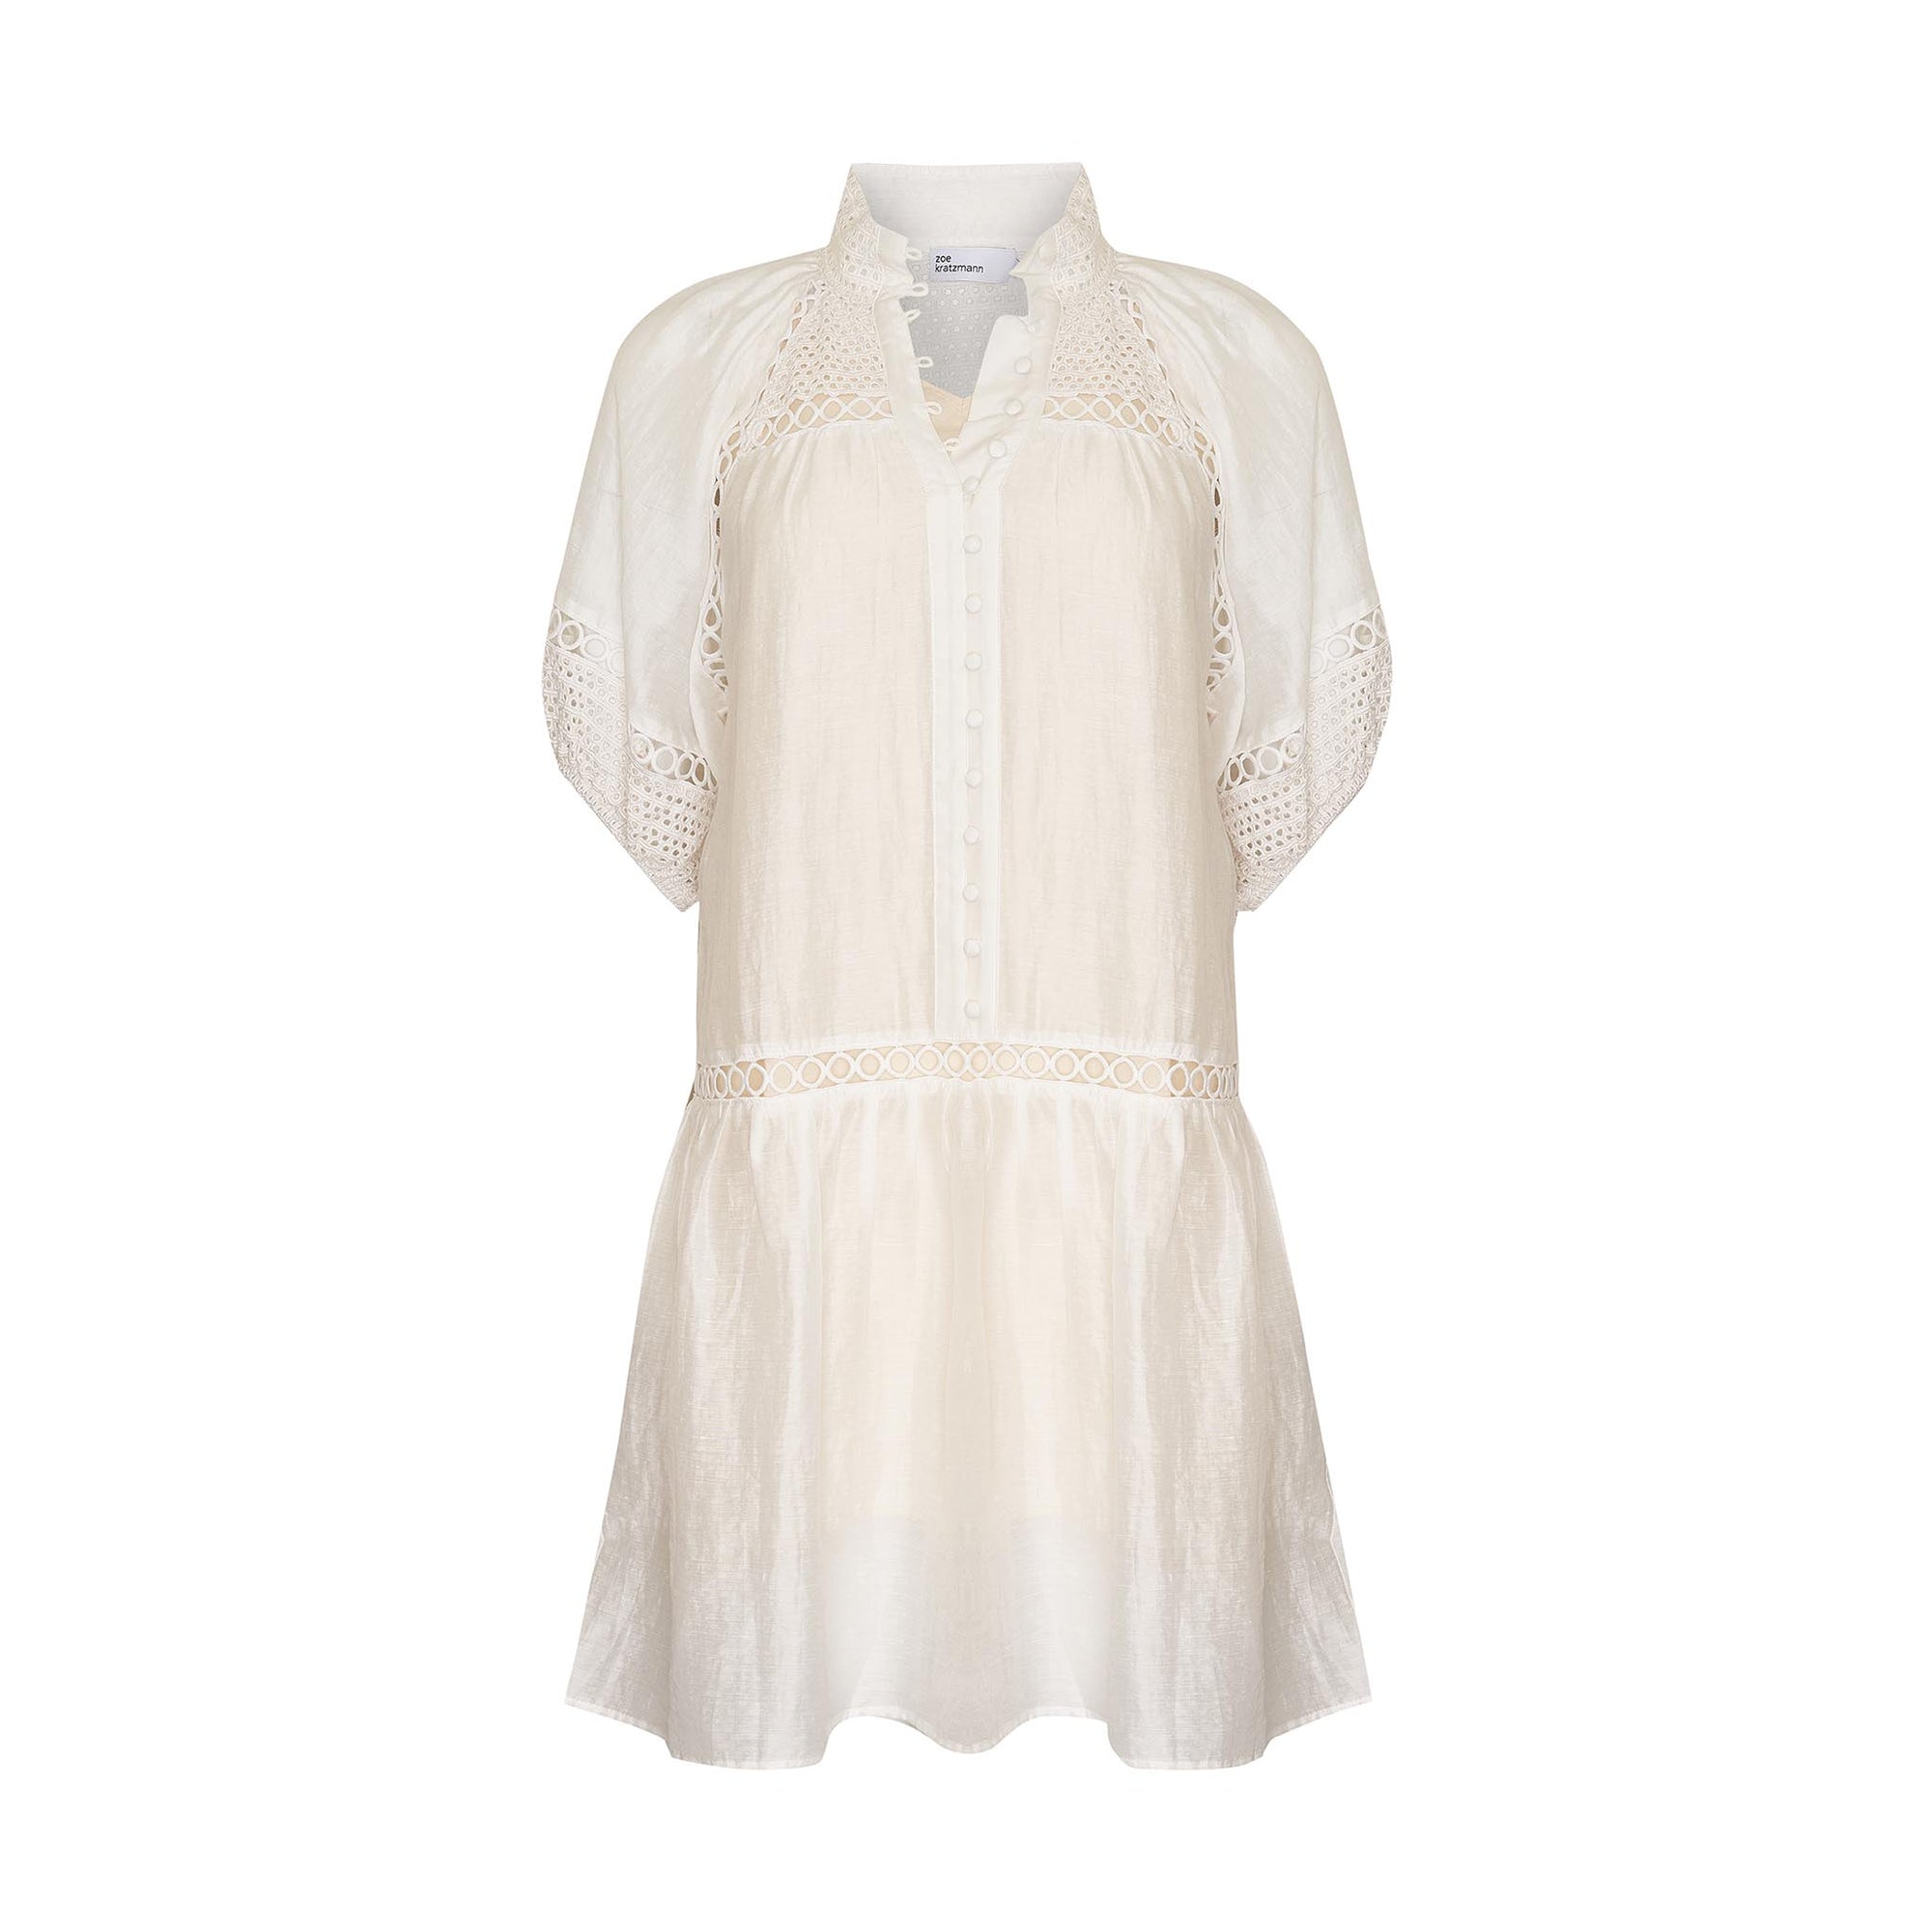 white, high neck, covered buttons, circular lace detailing, drop waist, mid-length sleeve, mini dress, product image